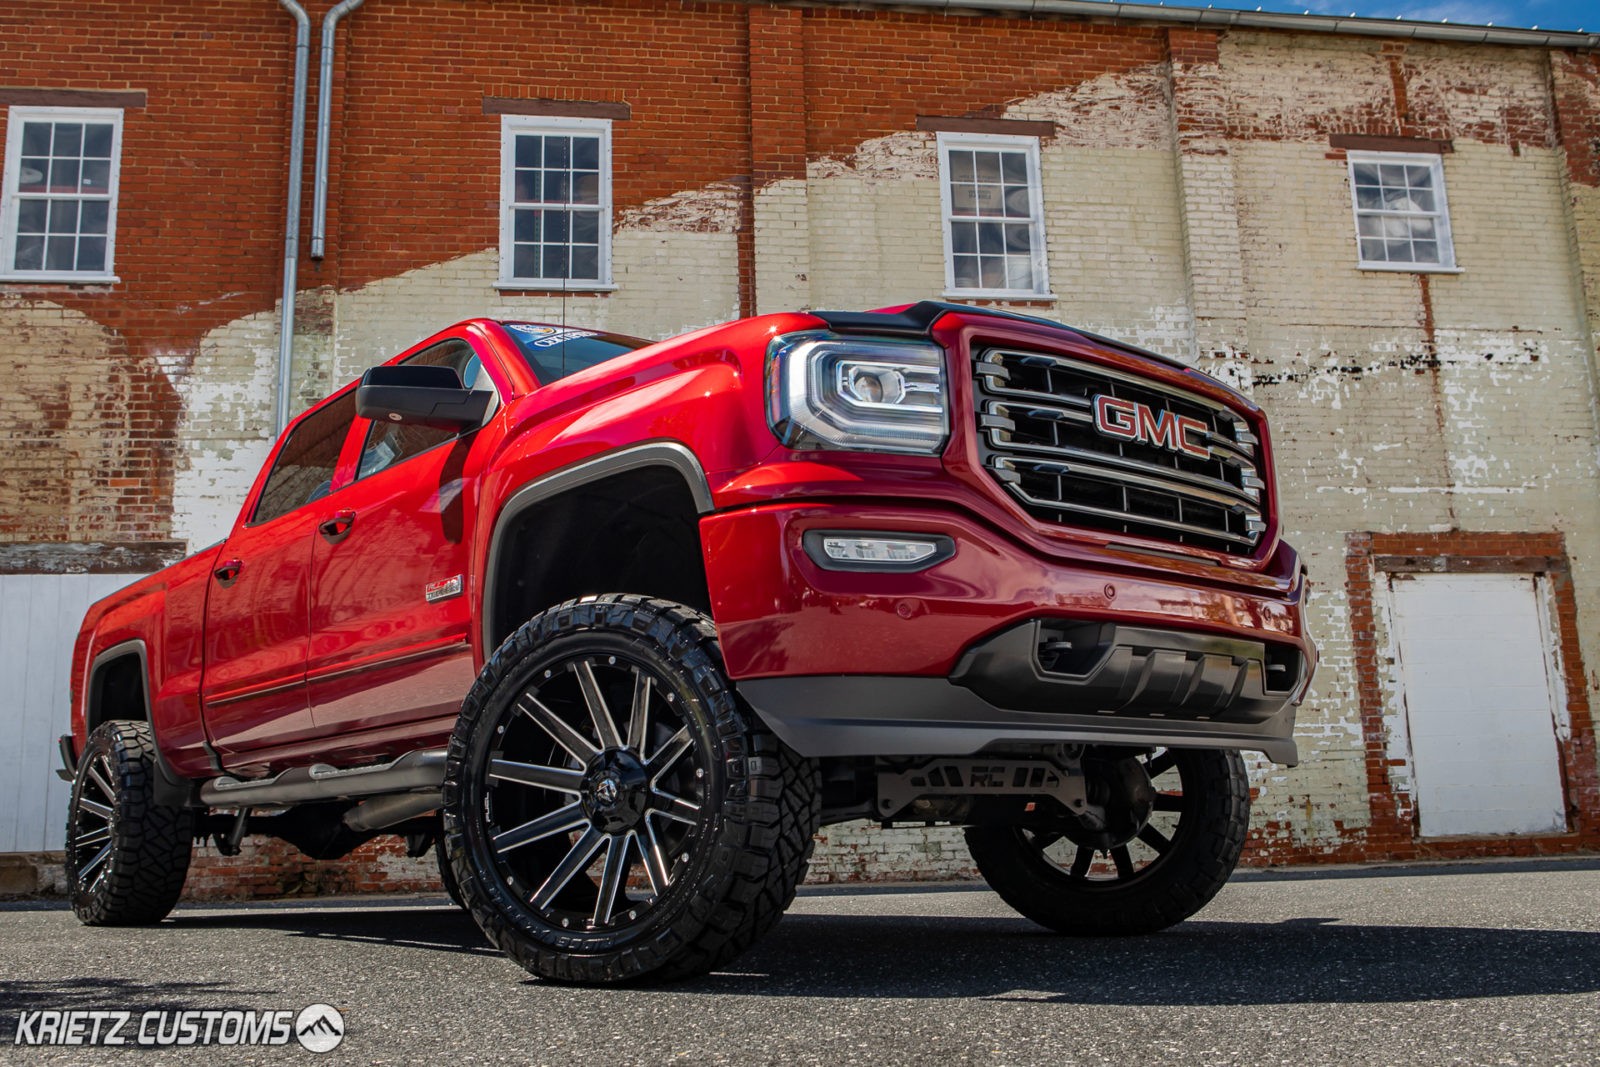 Lifted 2018 GMC Sierra 1500 with 22×10 Fuel Contra Wheels and 7 inch